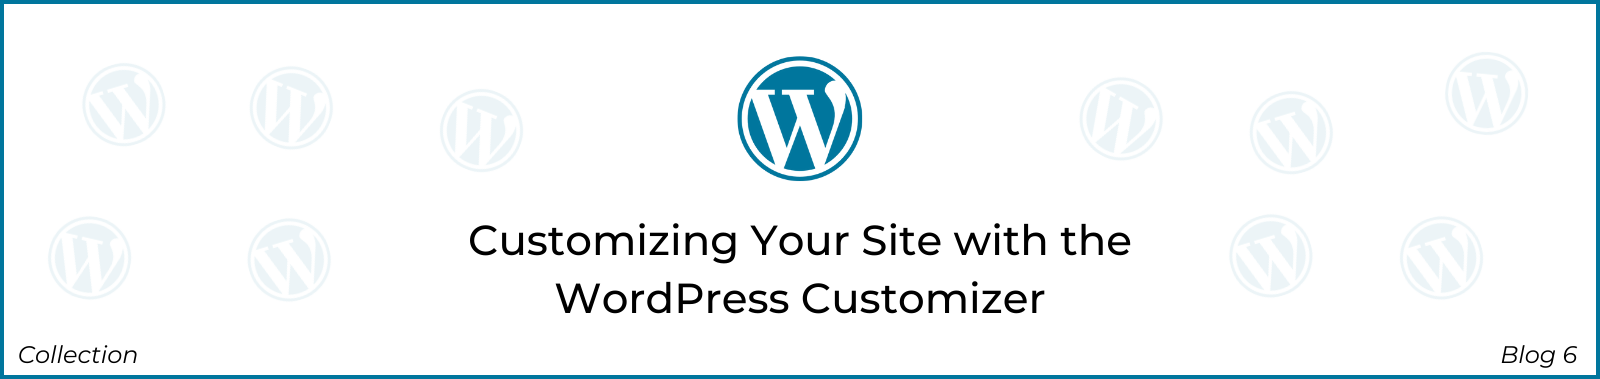 Customizing Your Site with the WordPress Customizer